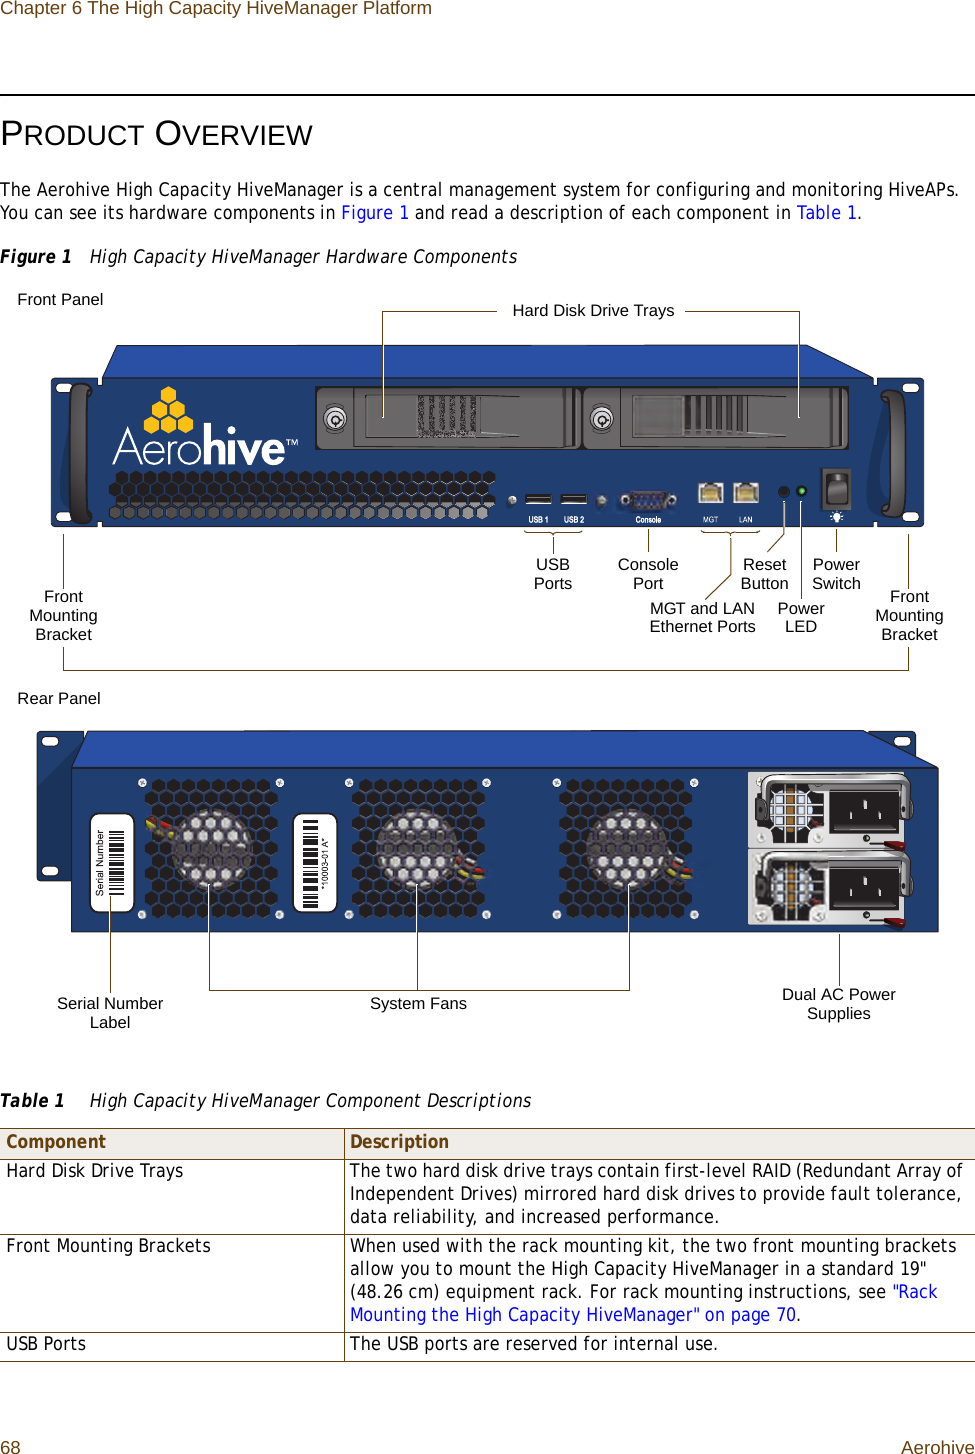 Chapter 6 The High Capacity HiveManager Platform68 AerohivePRODUCT OVERVIEWThe Aerohive High Capacity HiveManager is a central management system for configuring and monitoring HiveAPs. You can see its hardware components in Figure 1 and read a description of each component in Table 1.Figure 1  High Capacity HiveManager Hardware ComponentsTable 1  High Capacity HiveManager Component DescriptionsComponent DescriptionHard Disk Drive Trays The two hard disk drive trays contain first-level RAID (Redundant Array of Independent Drives) mirrored hard disk drives to provide fault tolerance, data reliability, and increased performance.Front Mounting Brackets When used with the rack mounting kit, the two front mounting brackets allow you to mount the High Capacity HiveManager in a standard 19&quot; (48.26 cm) equipment rack. For rack mounting instructions, see &quot;Rack Mounting the High Capacity HiveManager&quot; on page 70.USB Ports The USB ports are reserved for internal use.USB Ports Console PortPower LEDMGT and LAN Ethernet PortsSystem FansSerial Number LabelFront PanelRear PanelFront Mounting BracketPower SwitchHard Disk Drive TraysReset Button Front Mounting BracketDual AC Power Supplies